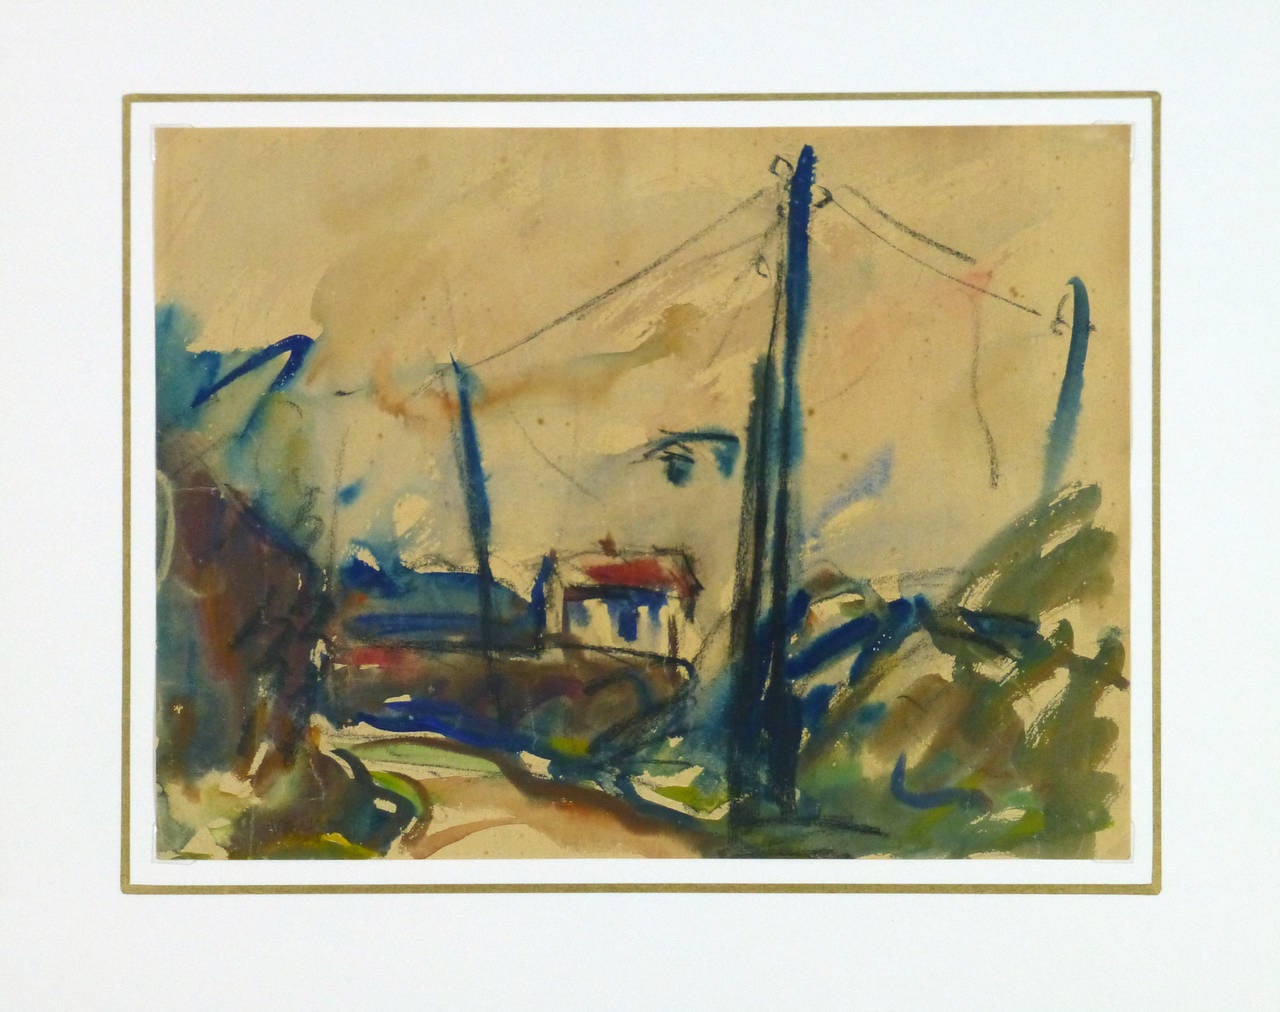 Vividly accented watercolor of a small home and utility lines running along a country backroad by French artist Raymond Deschamps, circa 1940. 

Artwork on paper displayed on a white mat with a gold border. Mat fits a standard-size frame. Archival